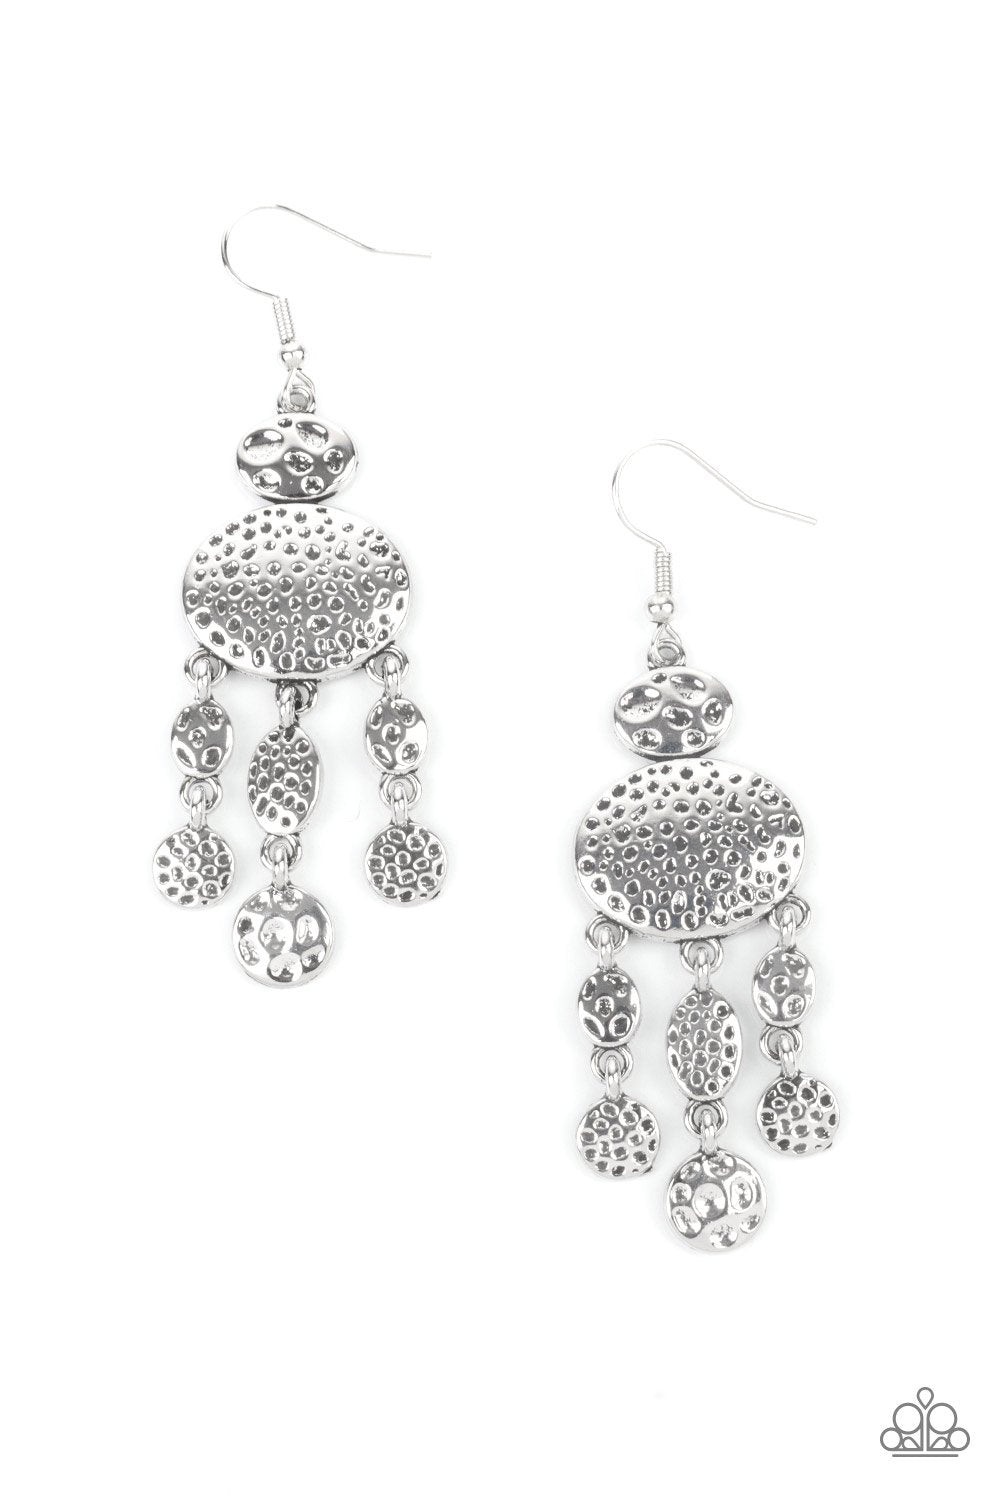 Get Your ARTIFACTS Straight Silver Earrings - Paparazzi Accessories- lightbox - CarasShop.com - $5 Jewelry by Cara Jewels